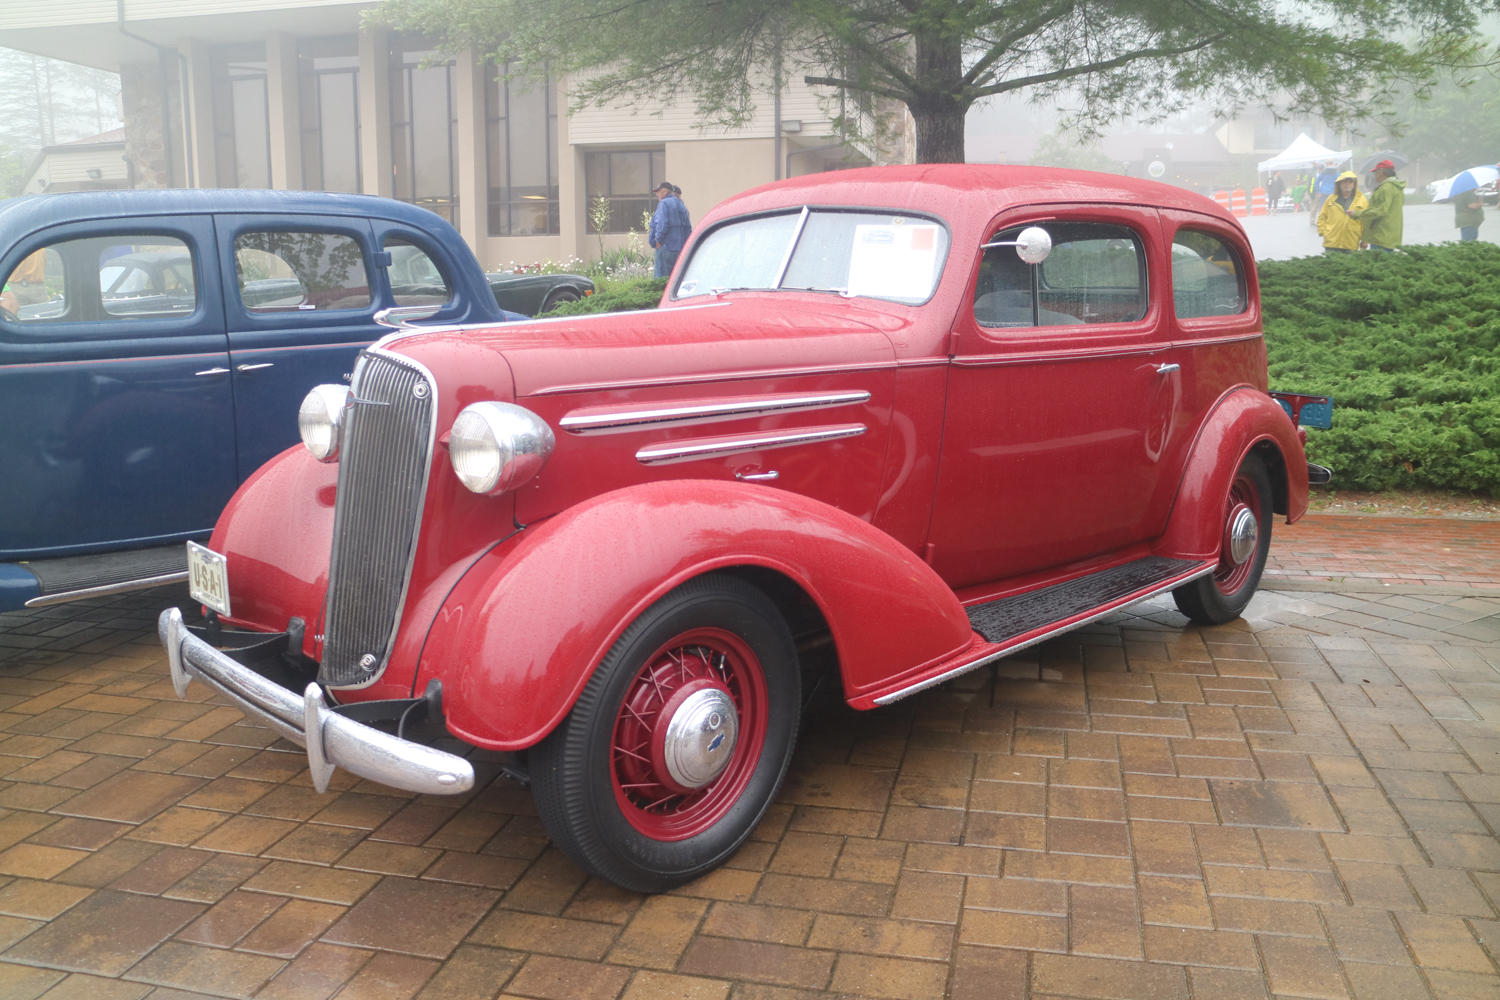 Best in Class, Touring Cars - 1936 Chevrolet Master.